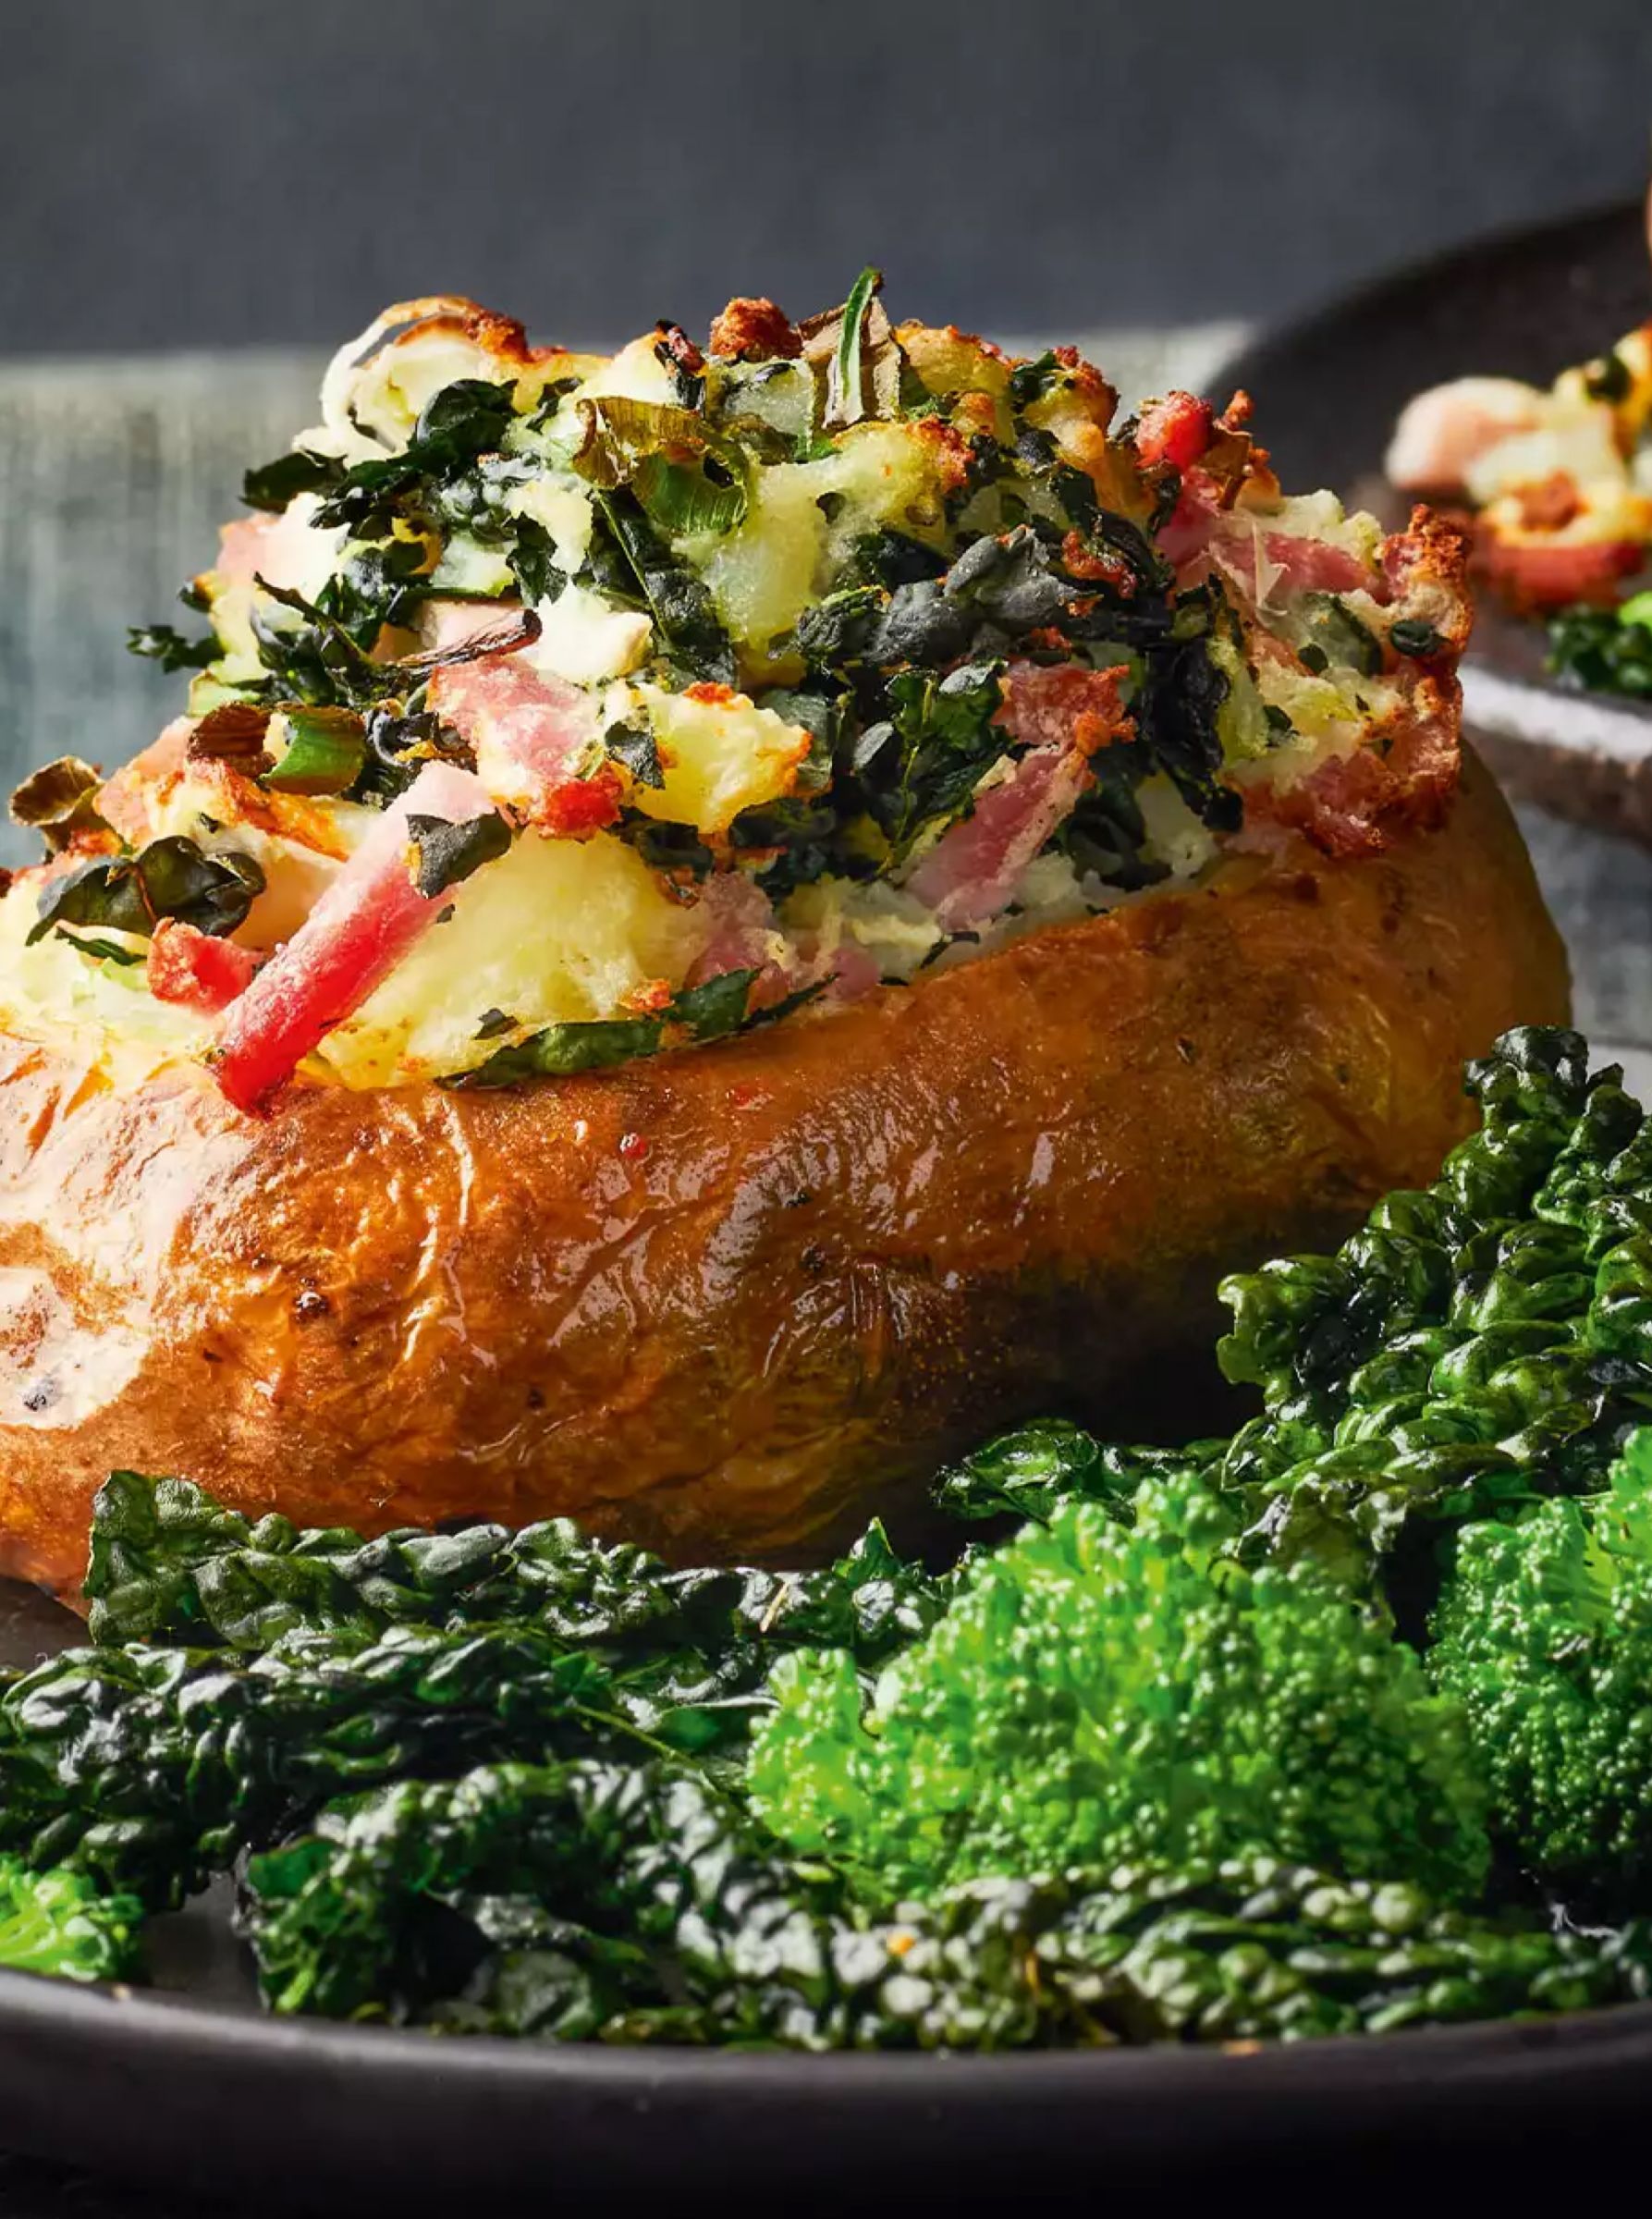 Air fryer twice-baked potatoes with kale, ham & goat’s cheese